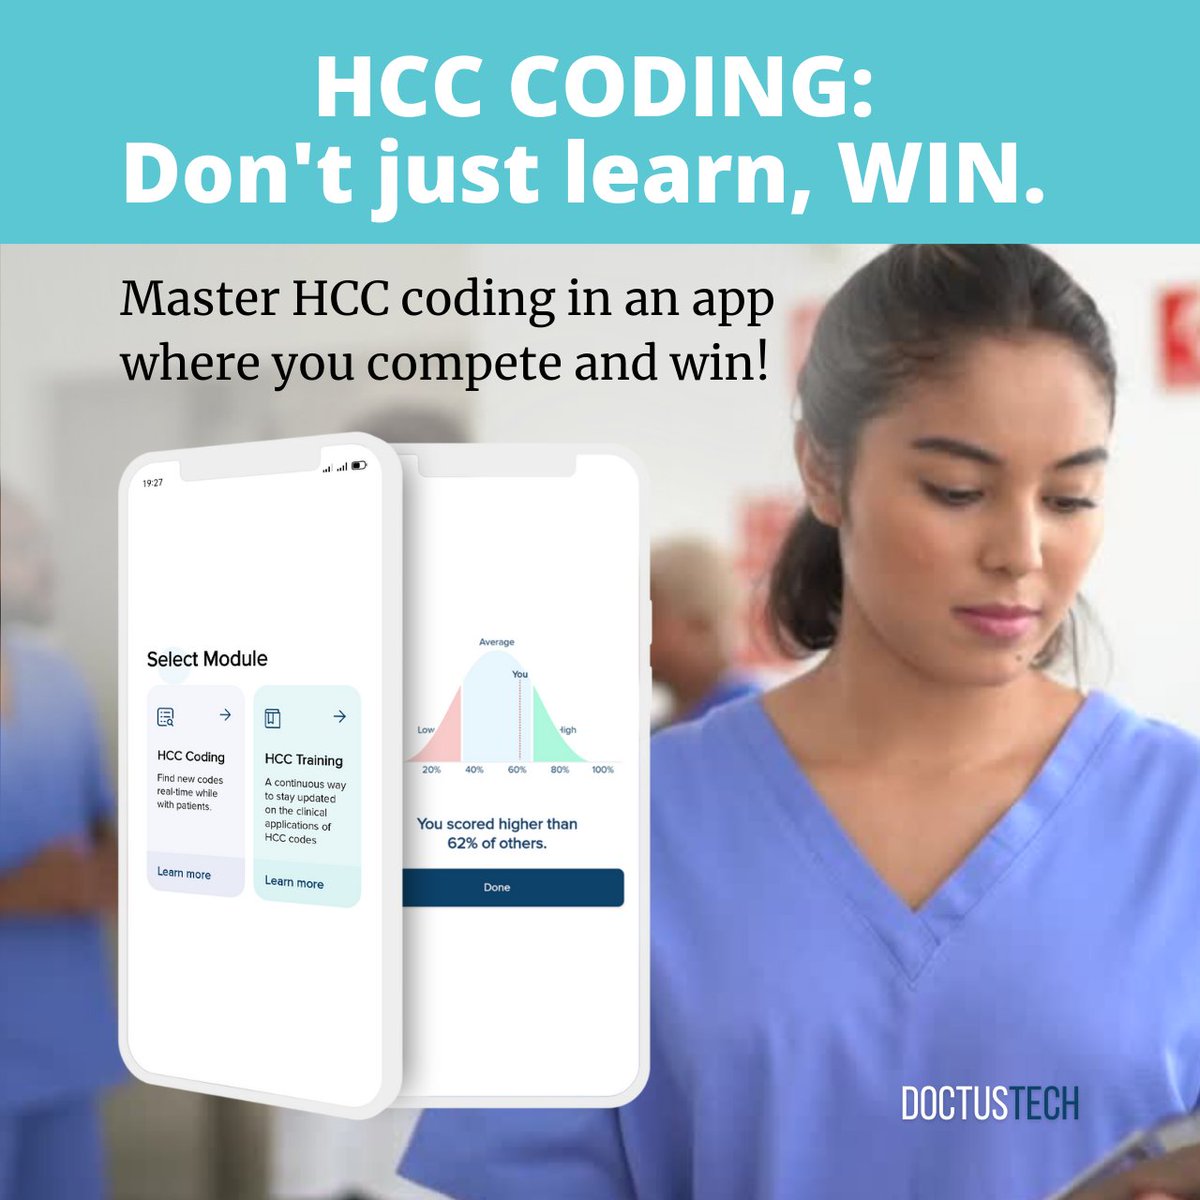 Kill the zoom and pick up the app that teaches HCC coding in clinical vignettes that clinicians actually enjoy. Compete, learn, win at VBC! 
.
.
#ValueBasedCare #VBC #HCC #HCCEducation #HCCcoding #RAF #RiskAdjustment